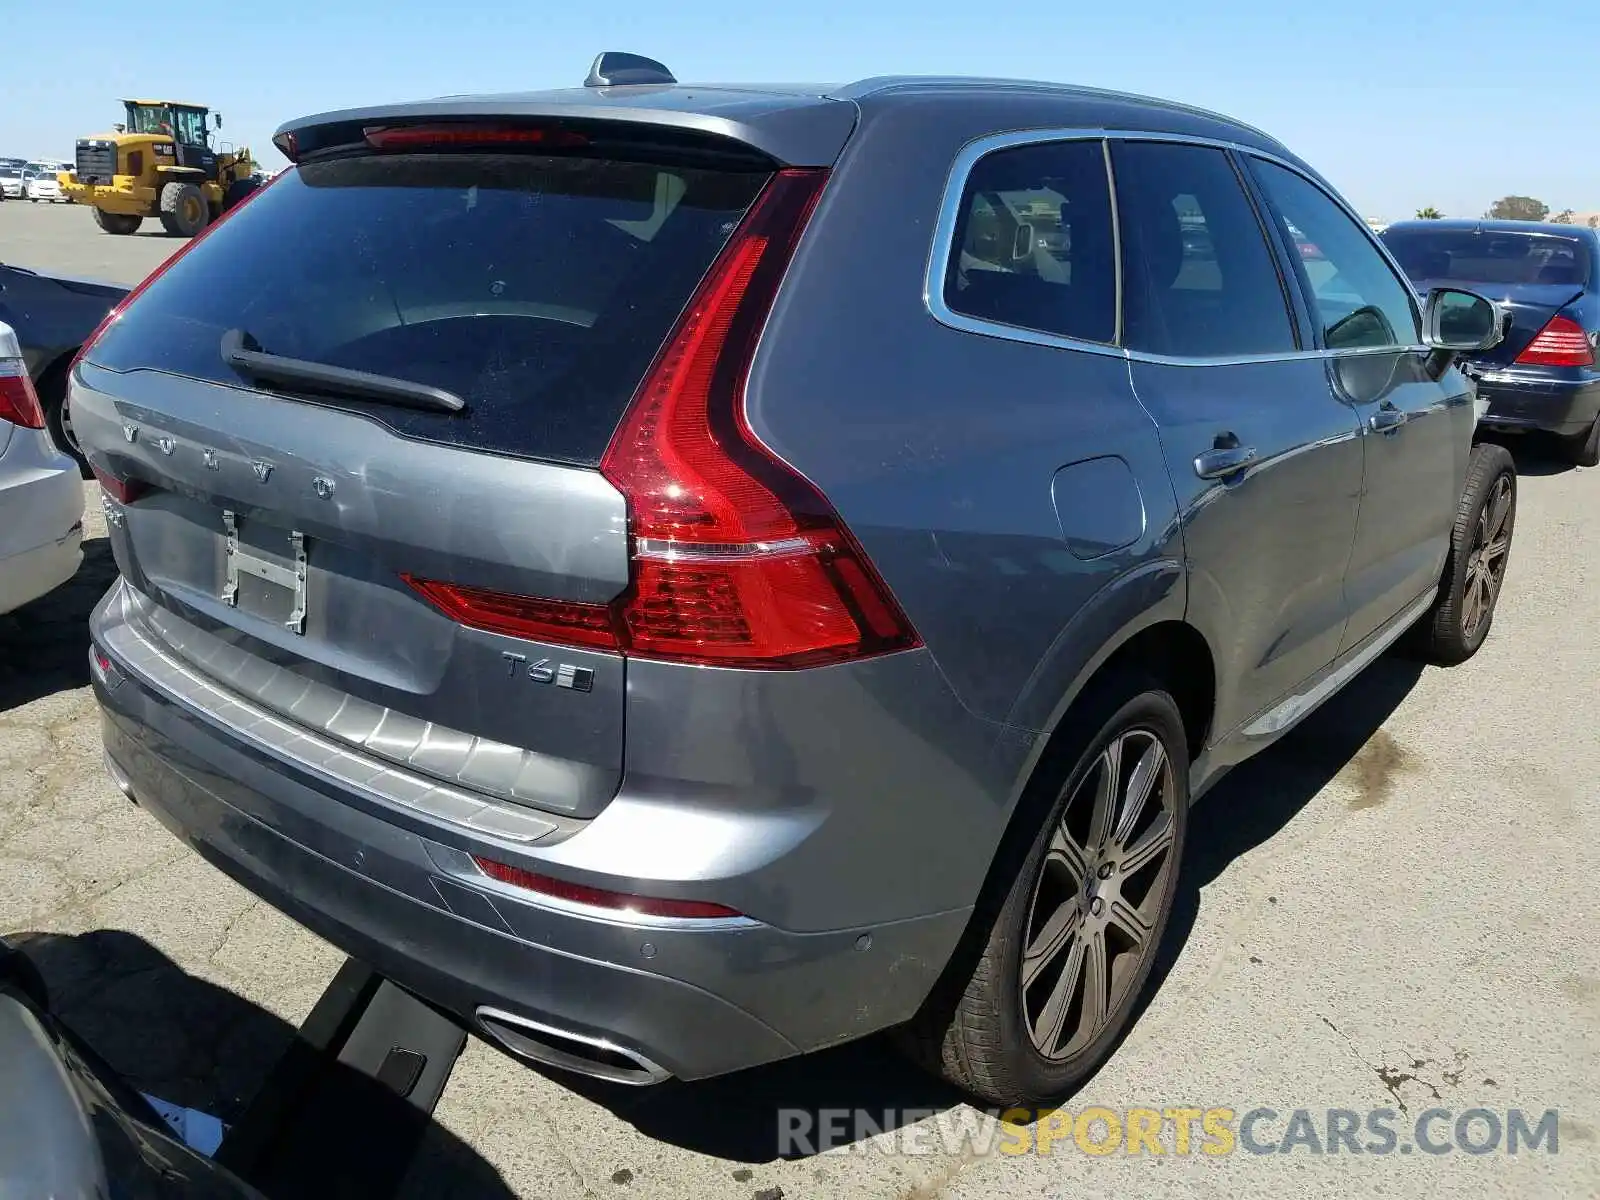 4 Photograph of a damaged car YV4A22RL9K1387262 VOLVO XC60 T6 IN 2019